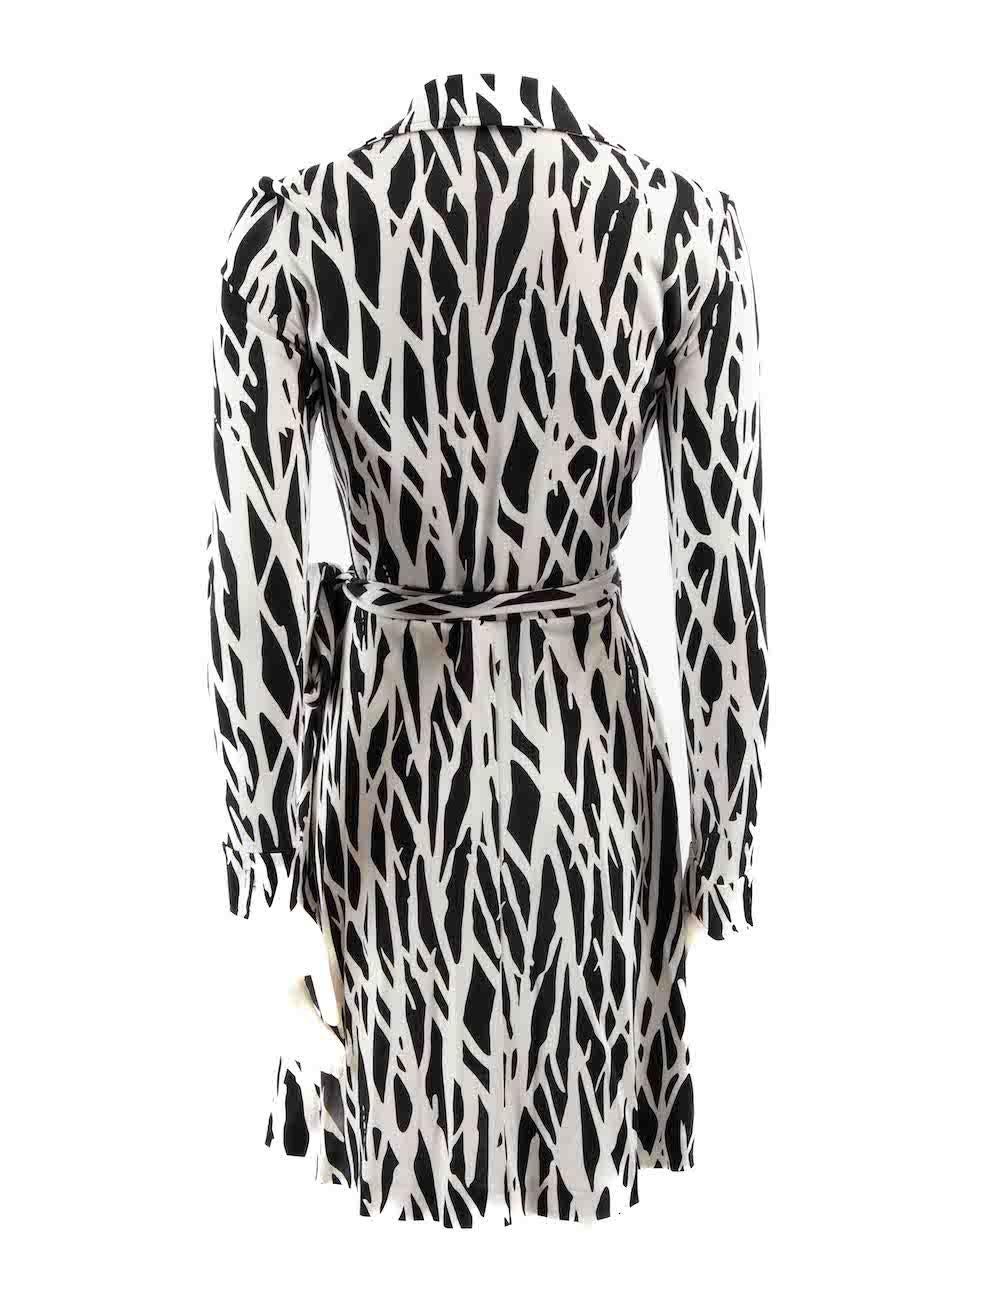 Diane Von Furstenberg Black Abstract Wrap Dress Size S In Good Condition For Sale In London, GB